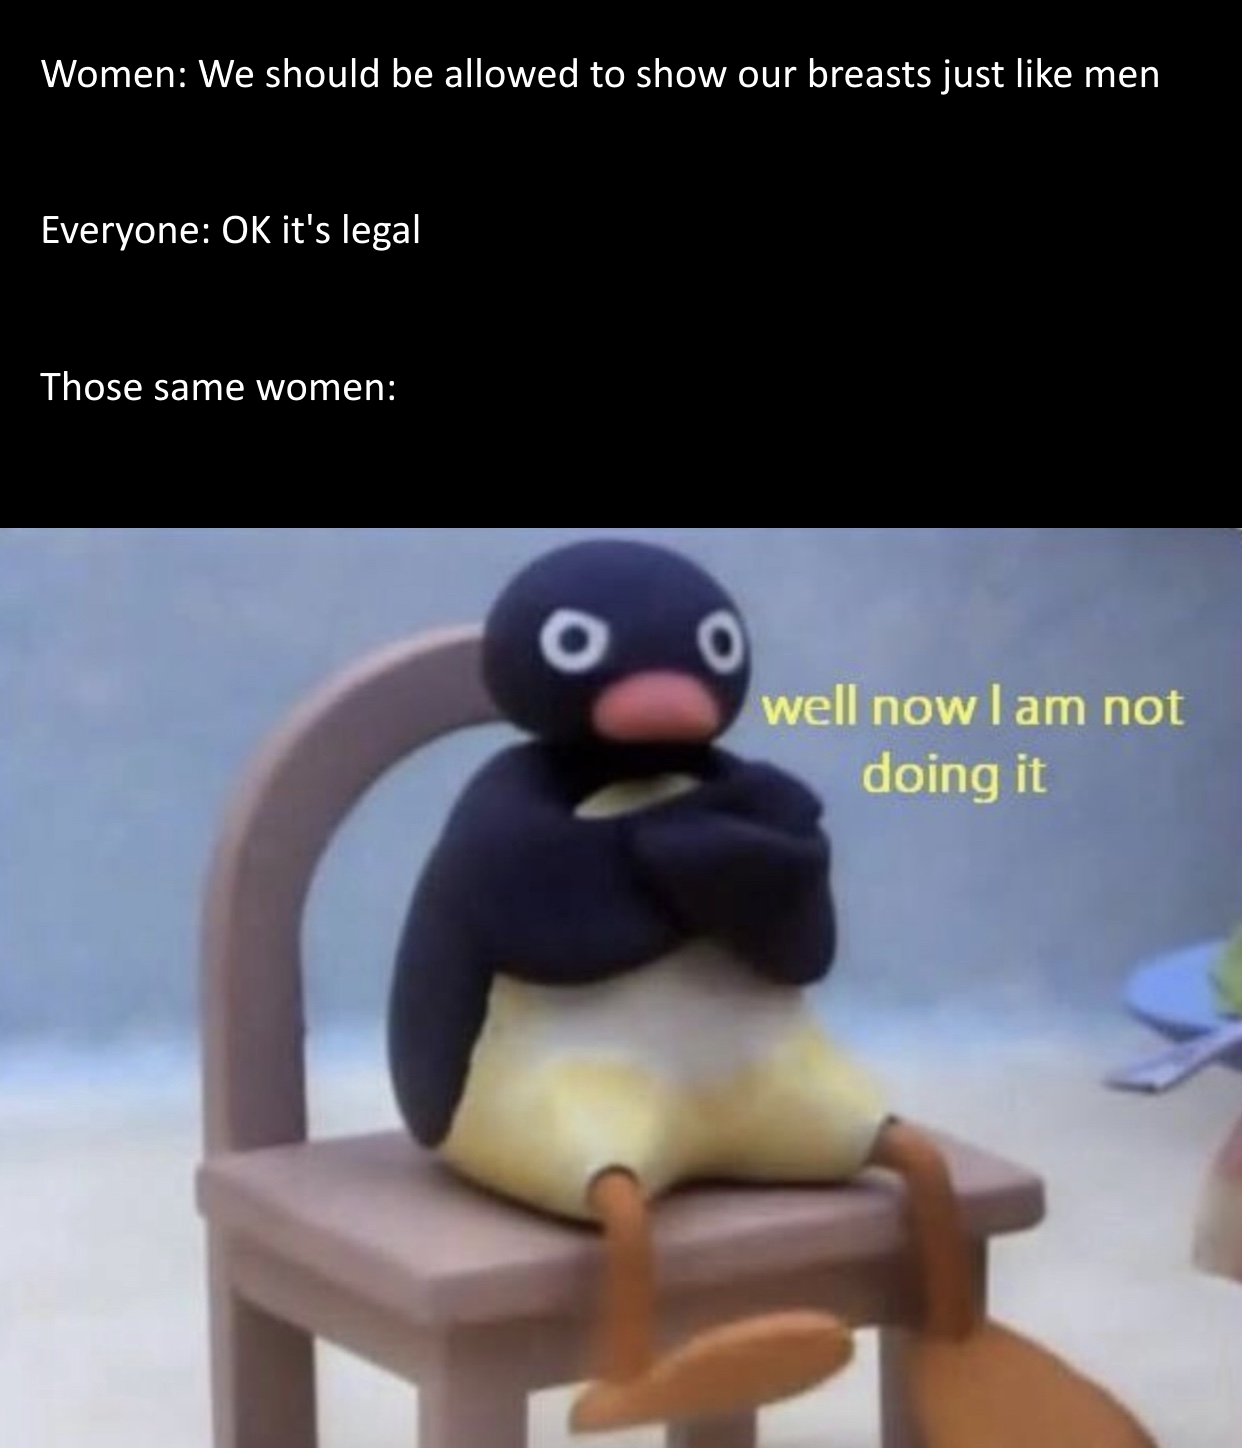 monday morning randomness - pingu well now i am not doing - Women We should be allowed to show our breasts just men Everyone Ok it's legal Those same women well now I am not doing it